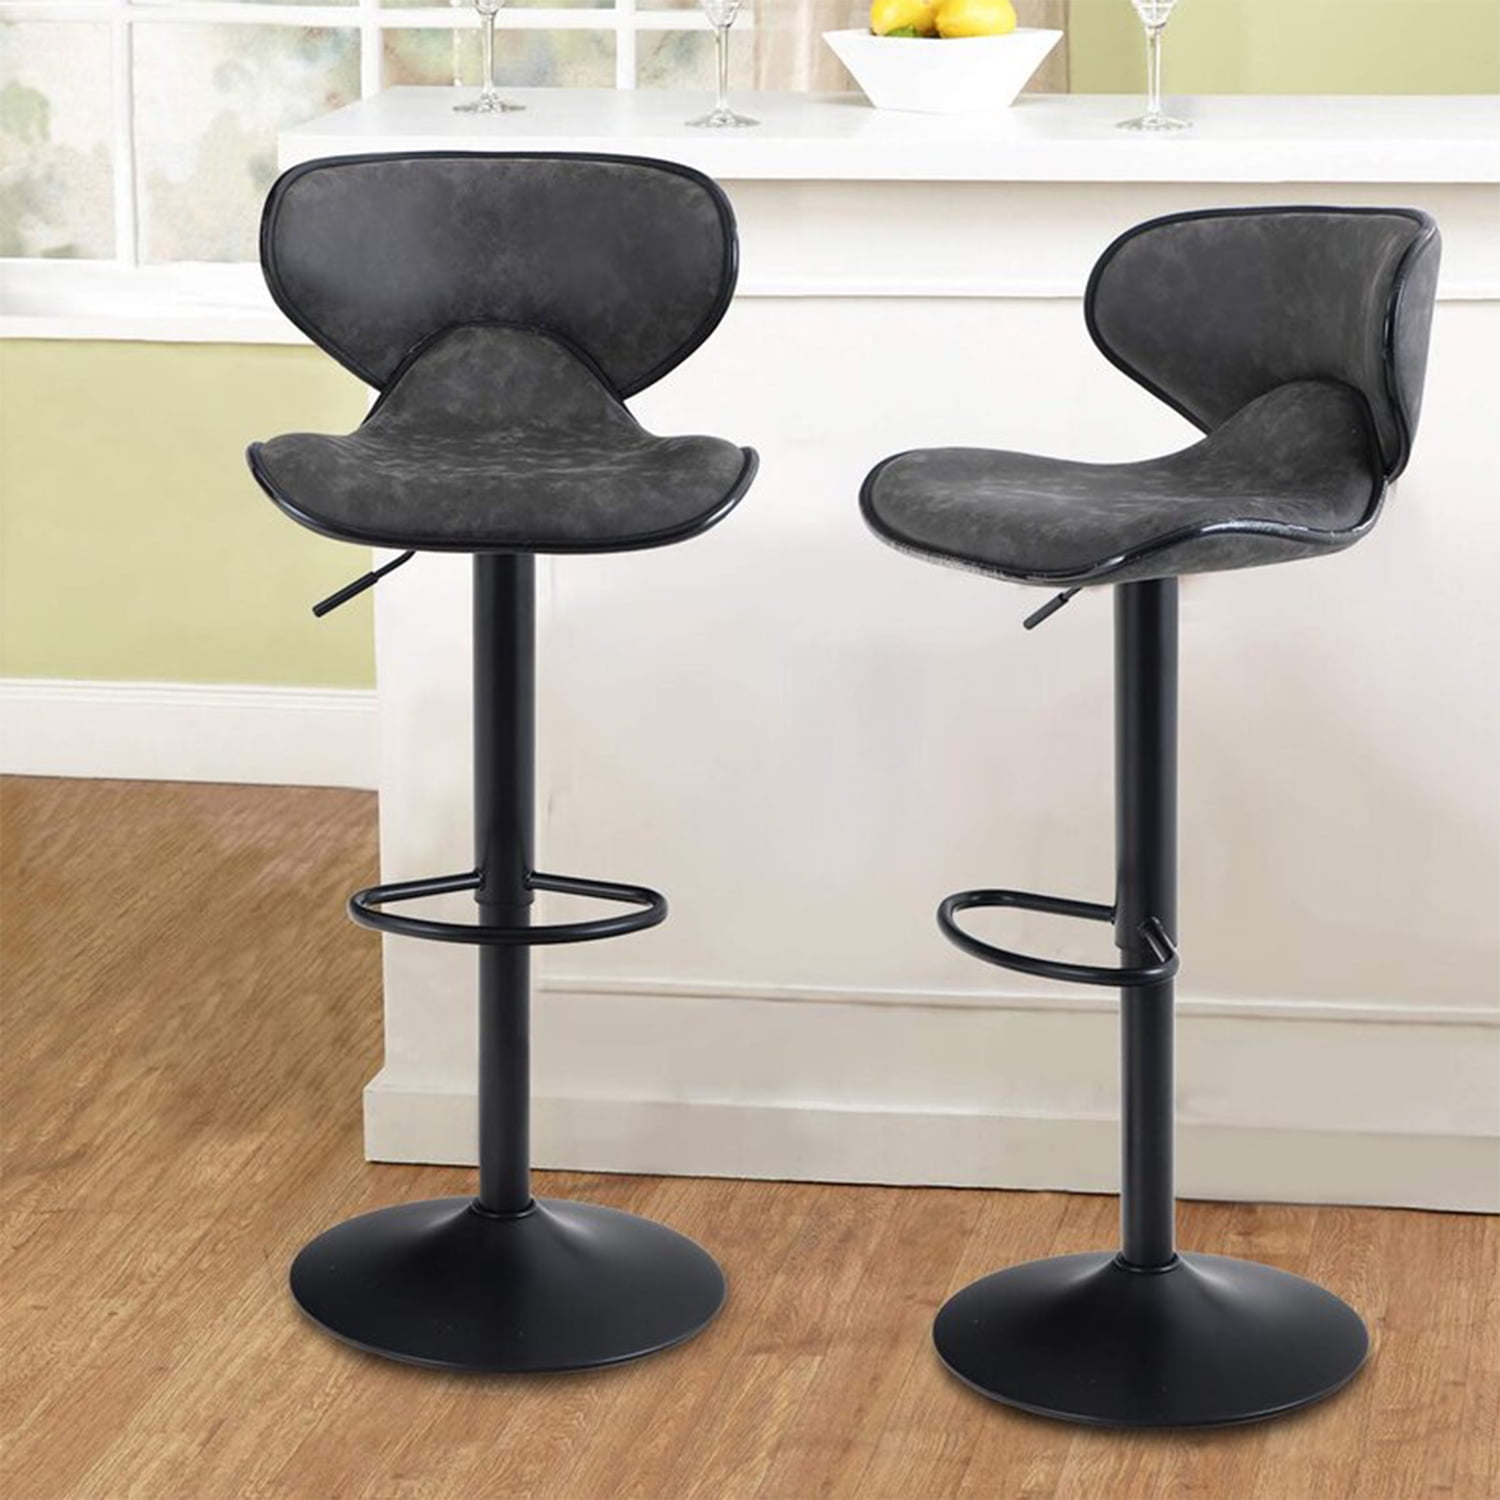 Set Of 2 Counter Height Bar Stools Adjustable Swivel Pub Kitchen Dining Living 